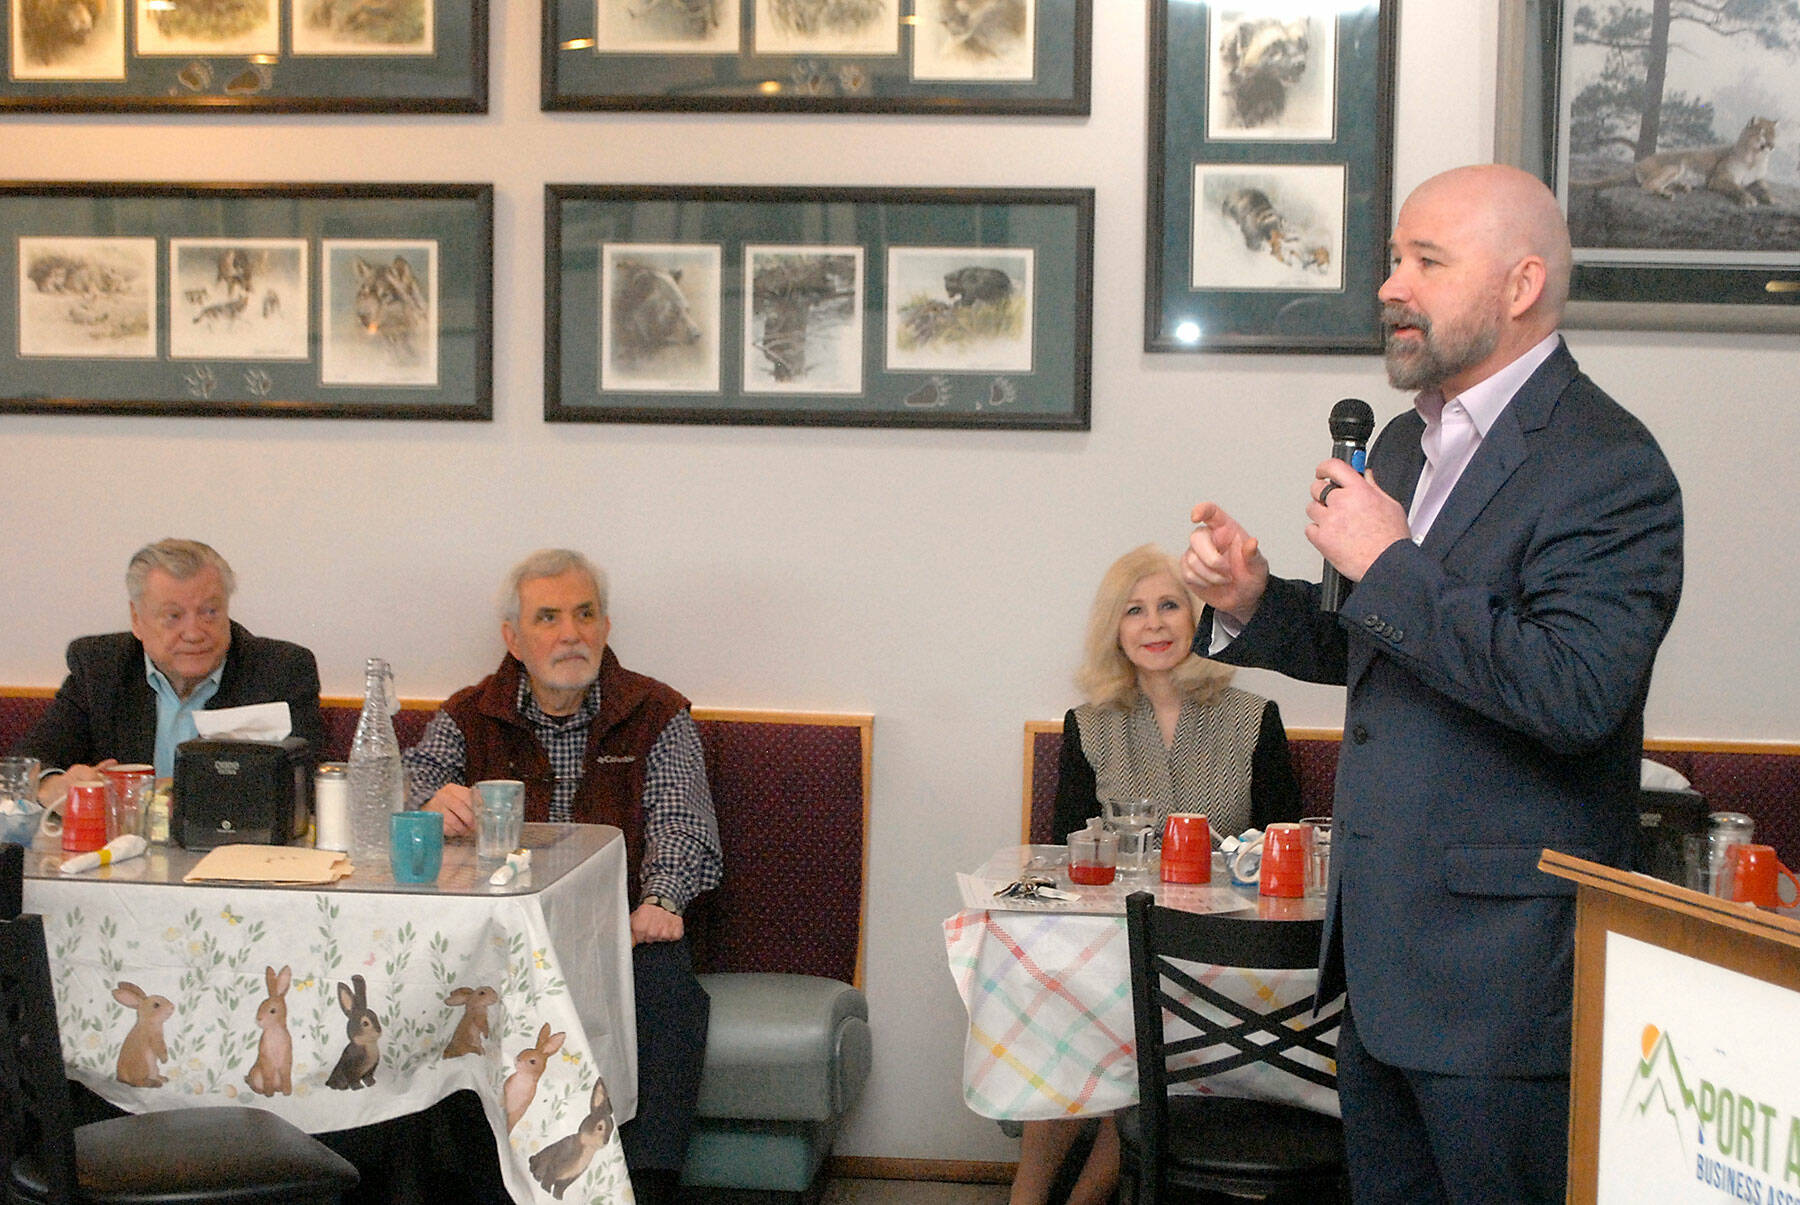 Ward, vice president of Sound Publishing and publisher of the six-day-per-week Peninsula Daily News and the weekly Sequim Gazette and Forks Forum, right, speaks about changes to the newspapers during a Tuesday morning breakfast with members of the Port Angeles Business Association. Ward described the switch to delivery by mail, adjustments to the publication schedule and the general health of the newspaper group. Among those in attendence were business association members, from left, Dick Pilling, former PDN publisher John Brewer and former mayor Cherie Kidd. (Keith Thorpe/Peninsula Daily News)